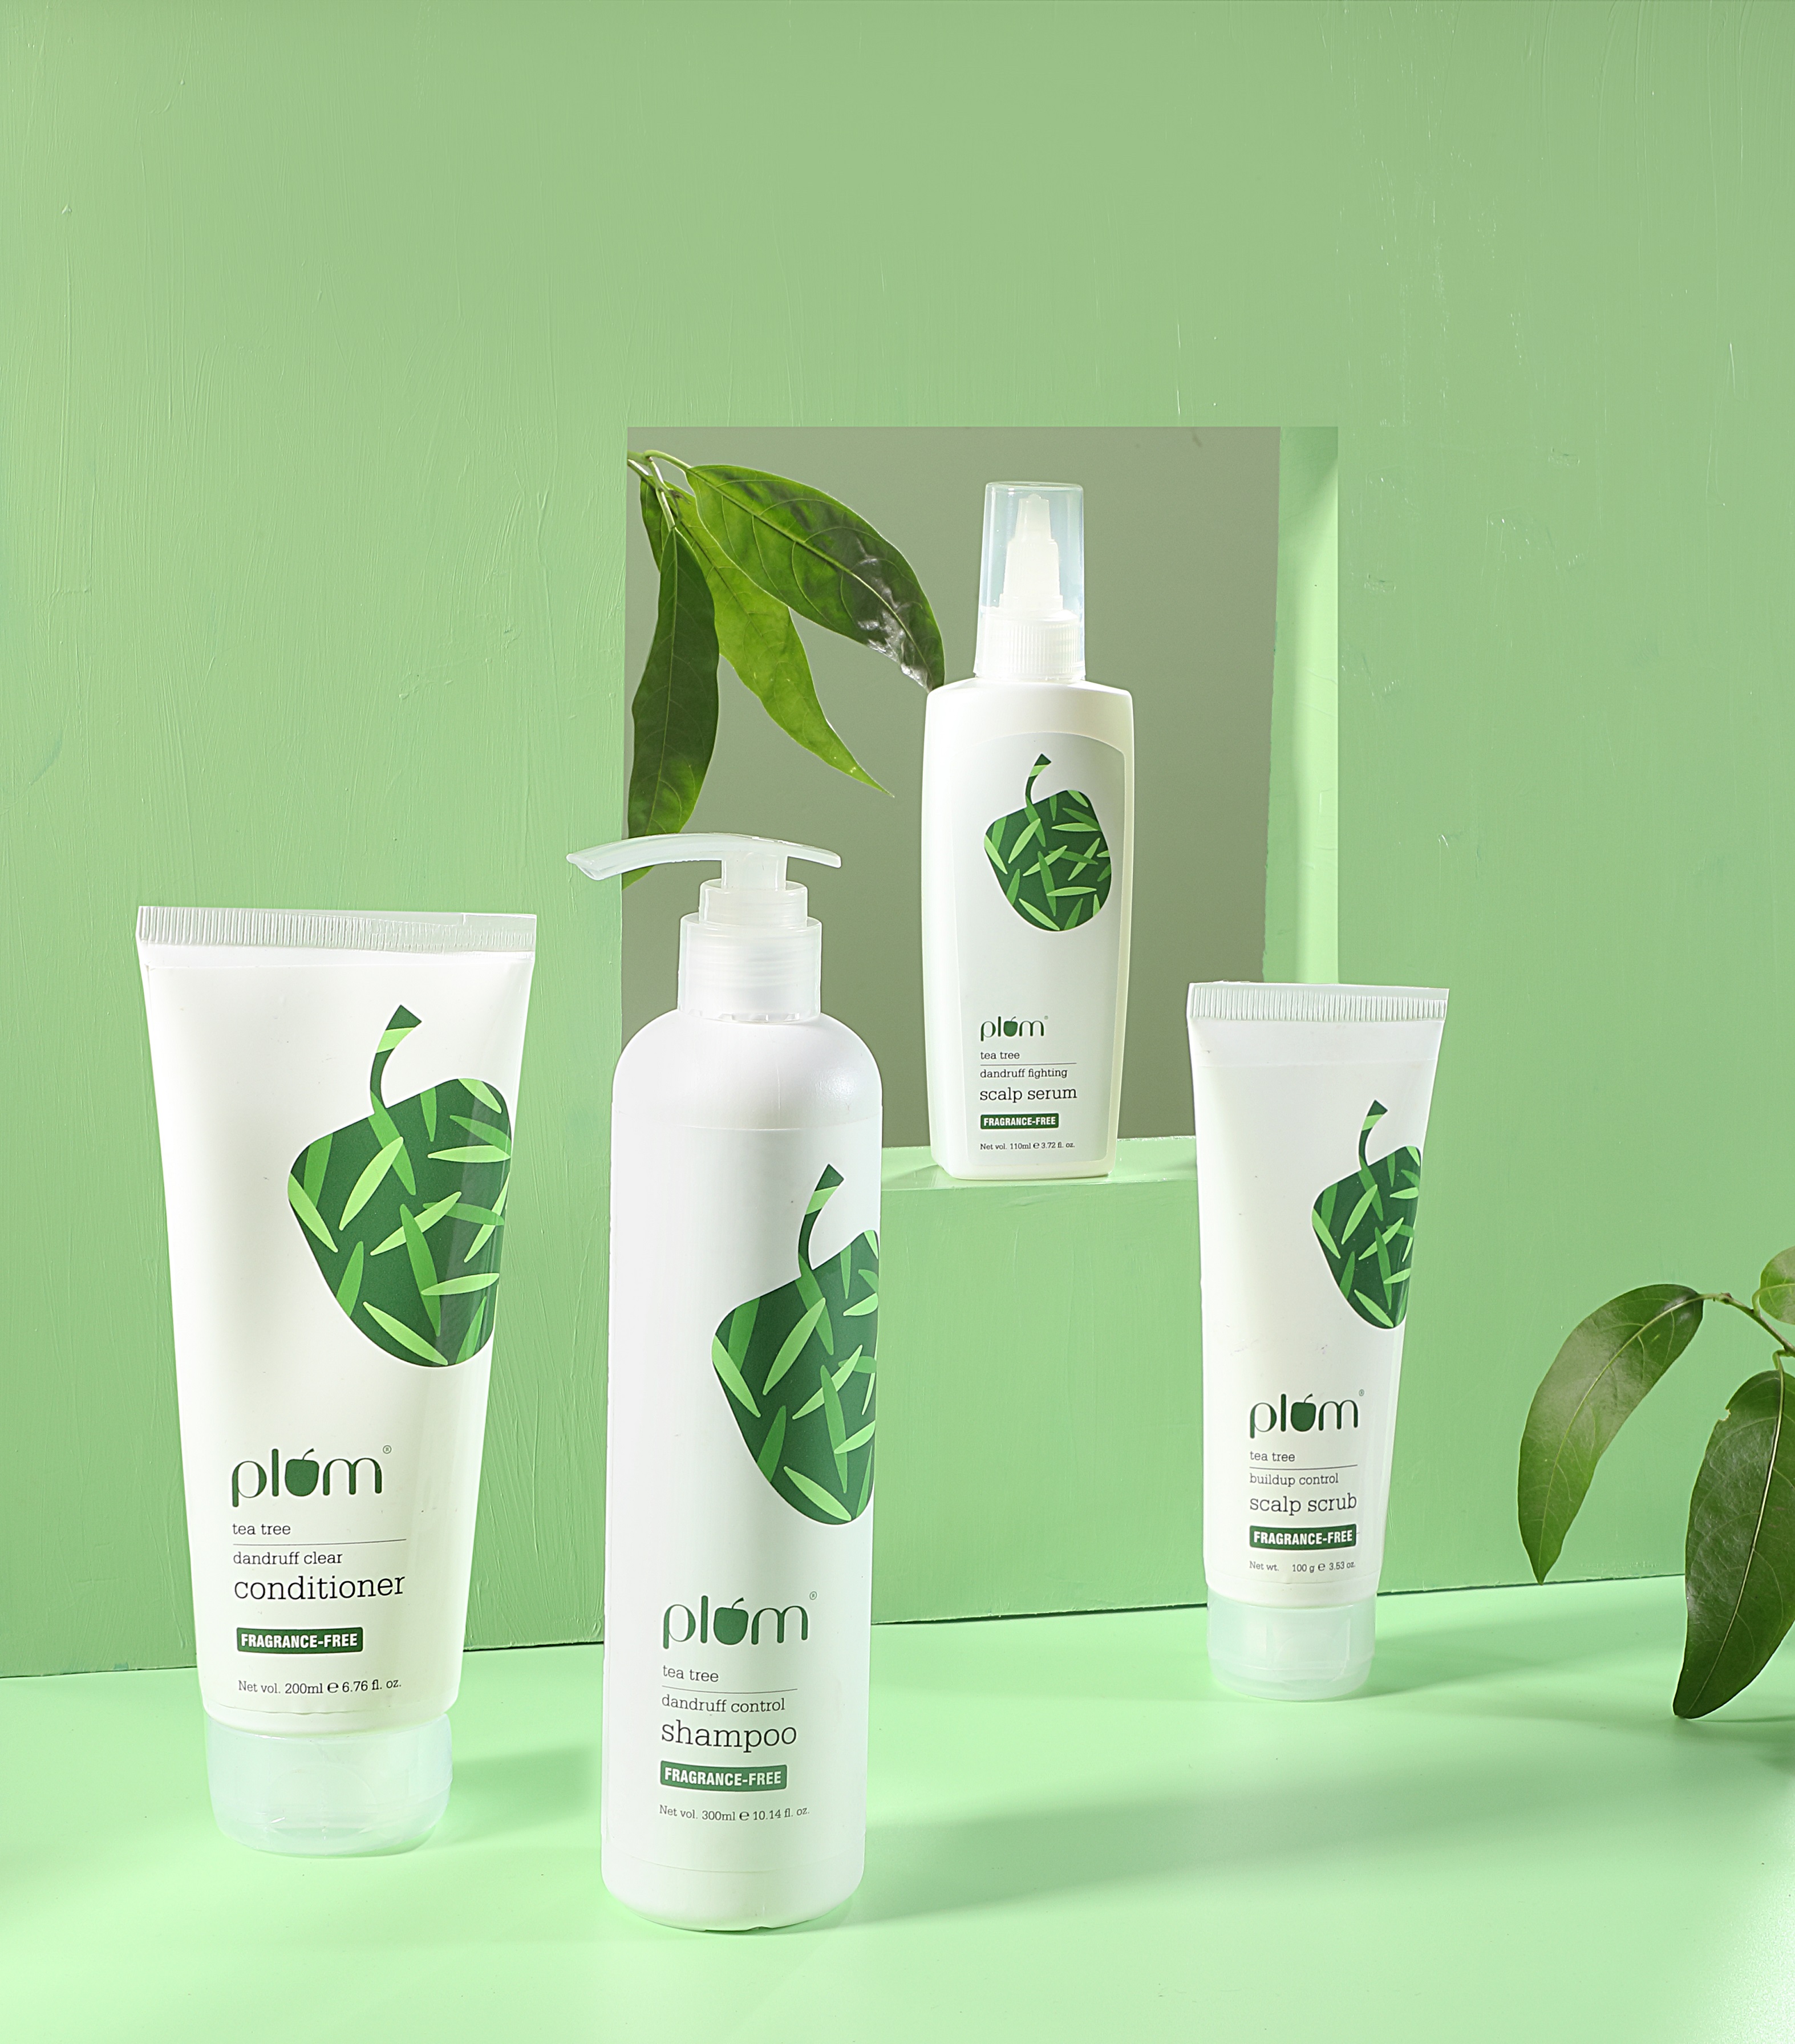 PLUM GOODNESS LAUNCHES A COMPLETE HAIRCARE REGIME UNDER THEIR NEWLY INTRODUCED TEA TREE RANGE